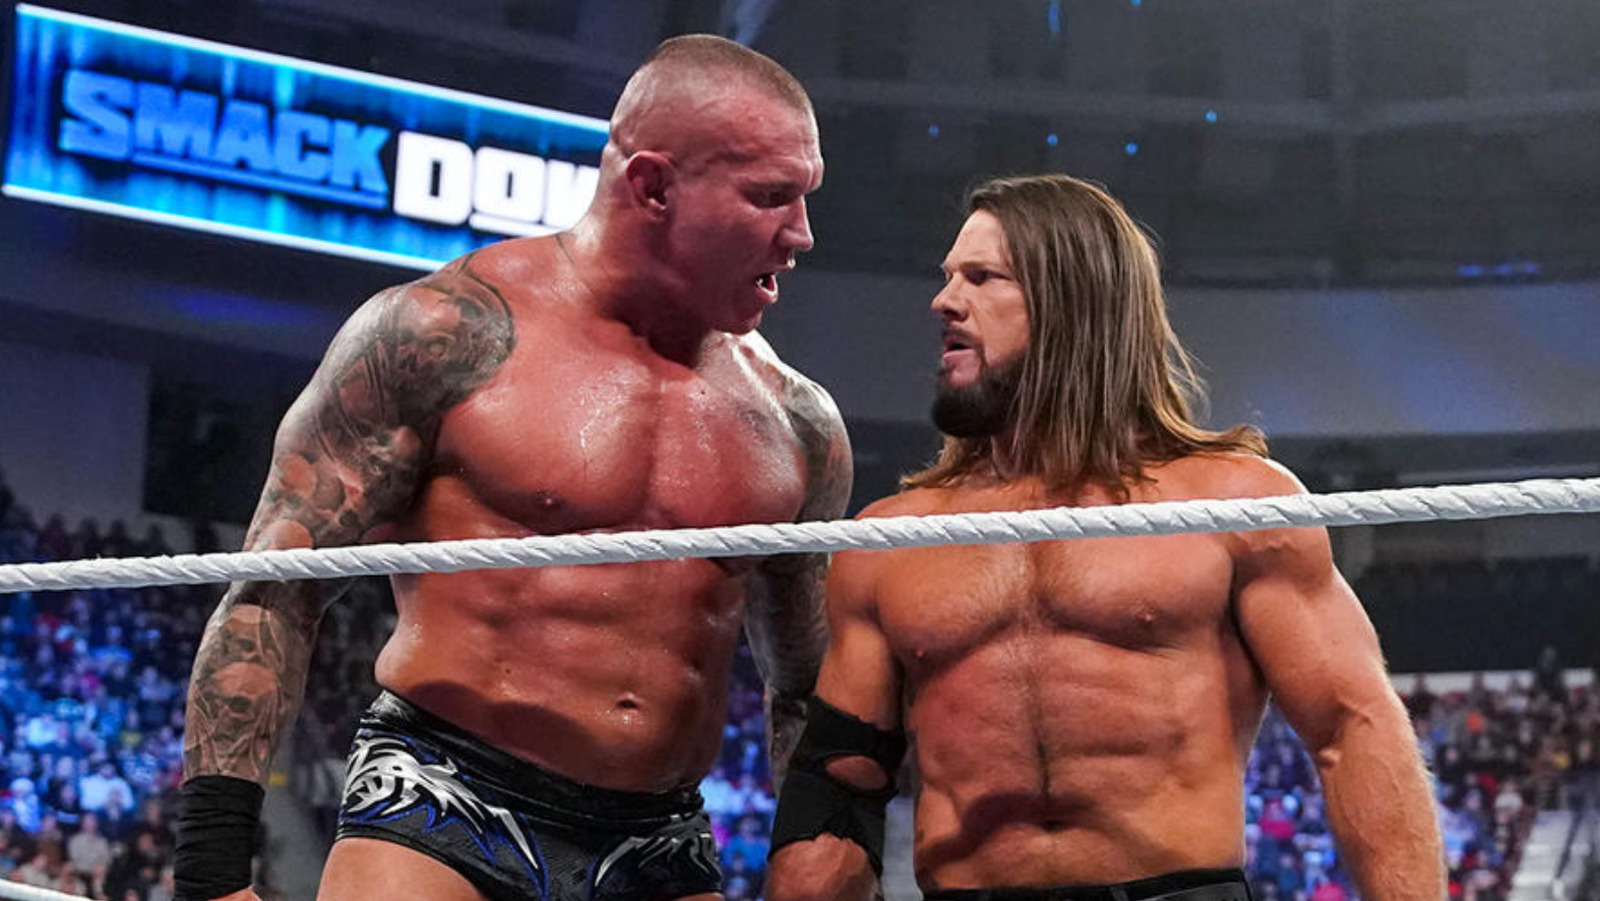 Inside the Ring: Unraveling the Bonds and Battles of WWE's Finest